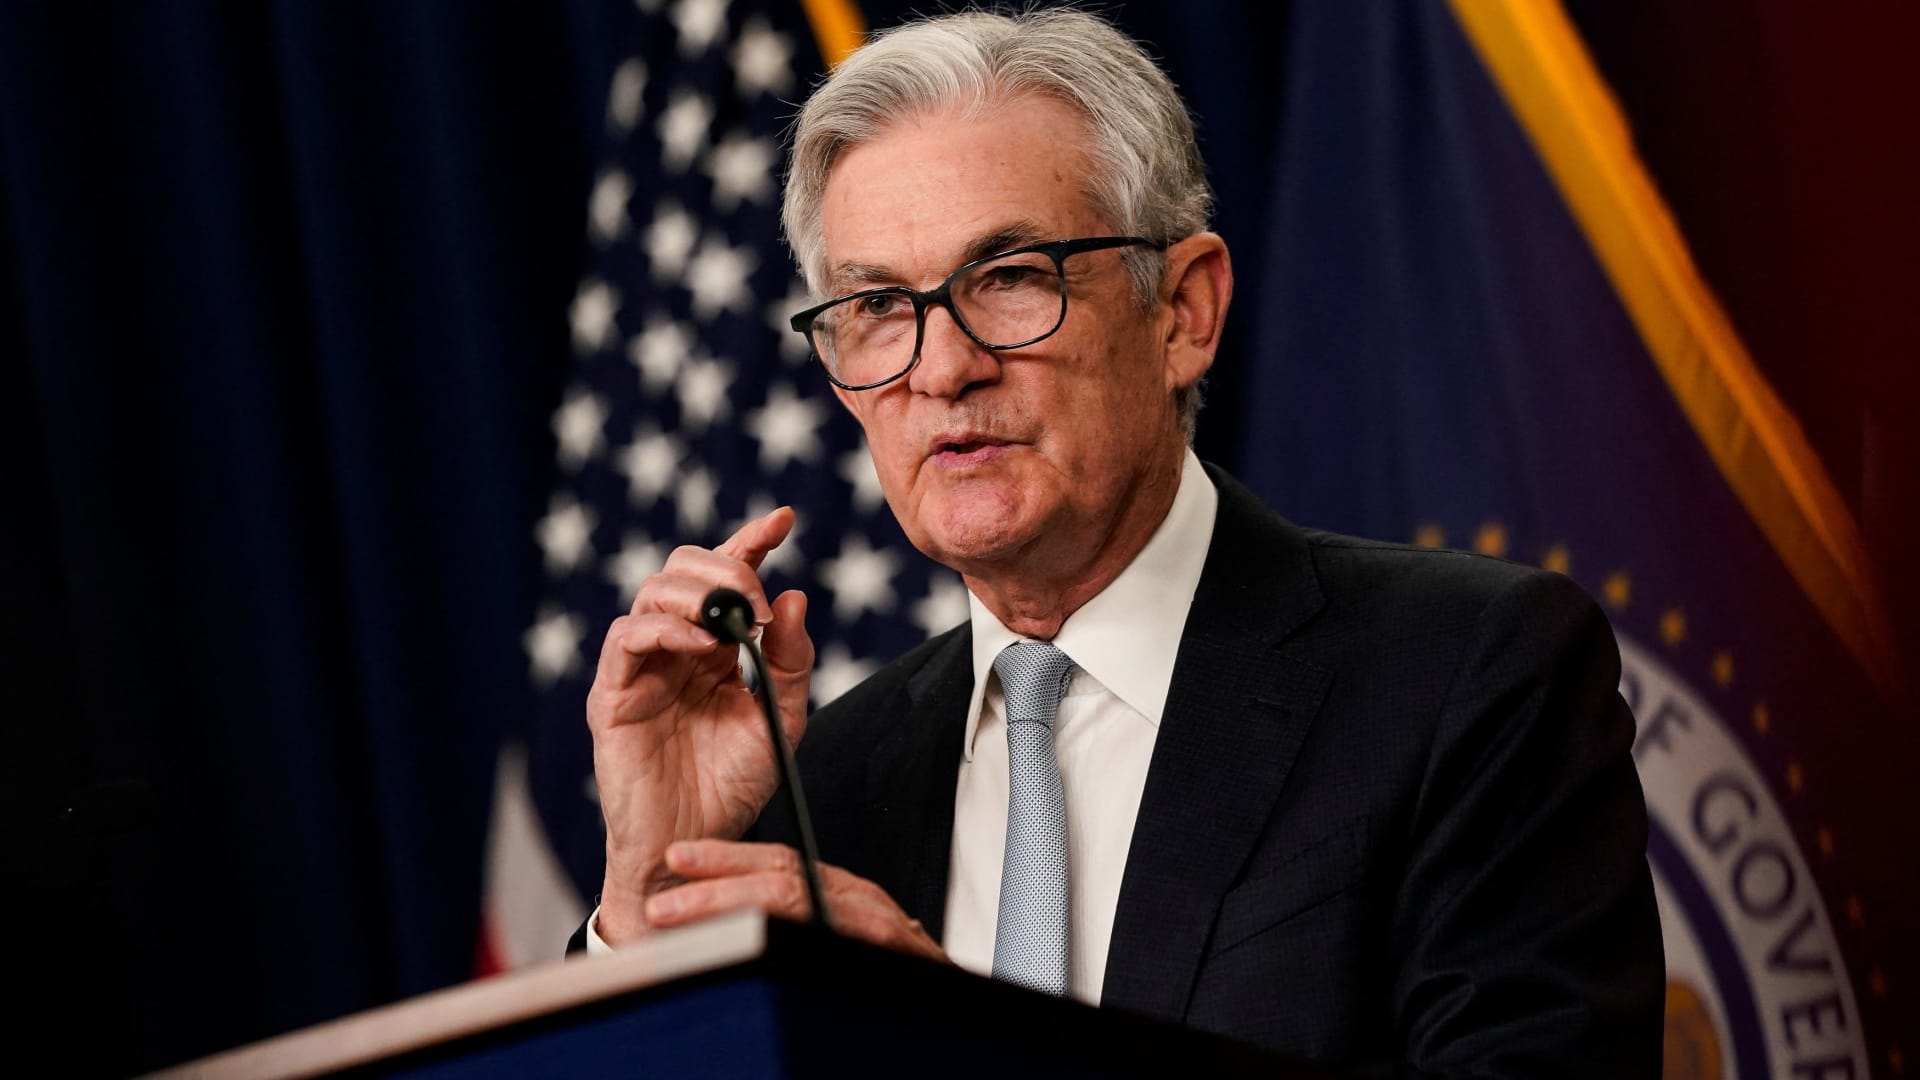 Fed’s latest rate decision ahead